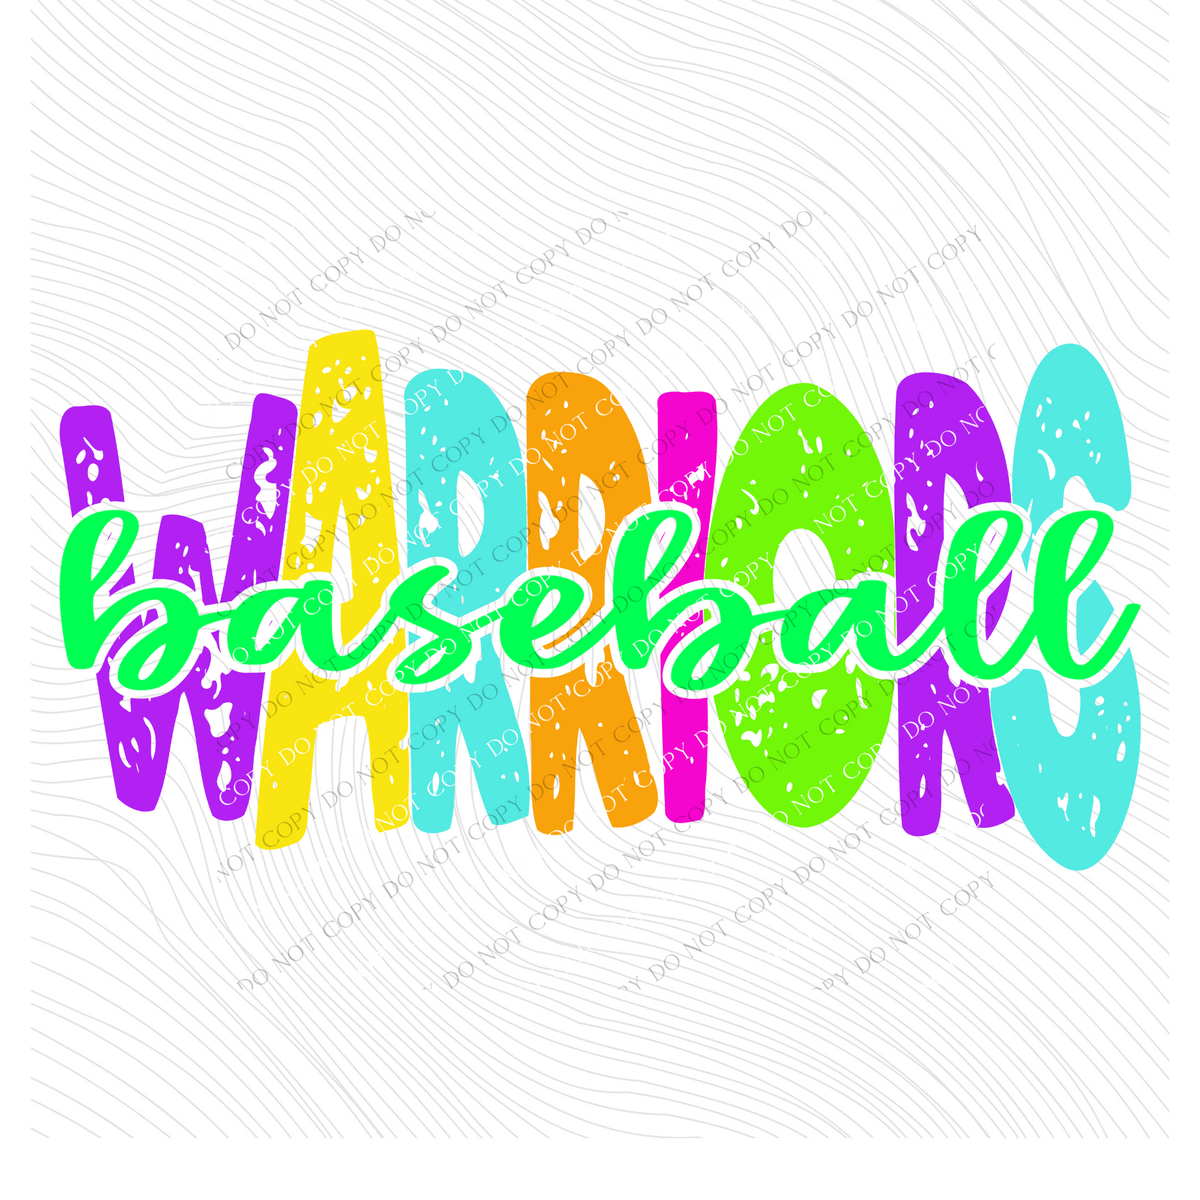 Warriors Distressed Blank, Cutout Softball, Baseball & Volleyball in Neons all Included Digital Design, PNG